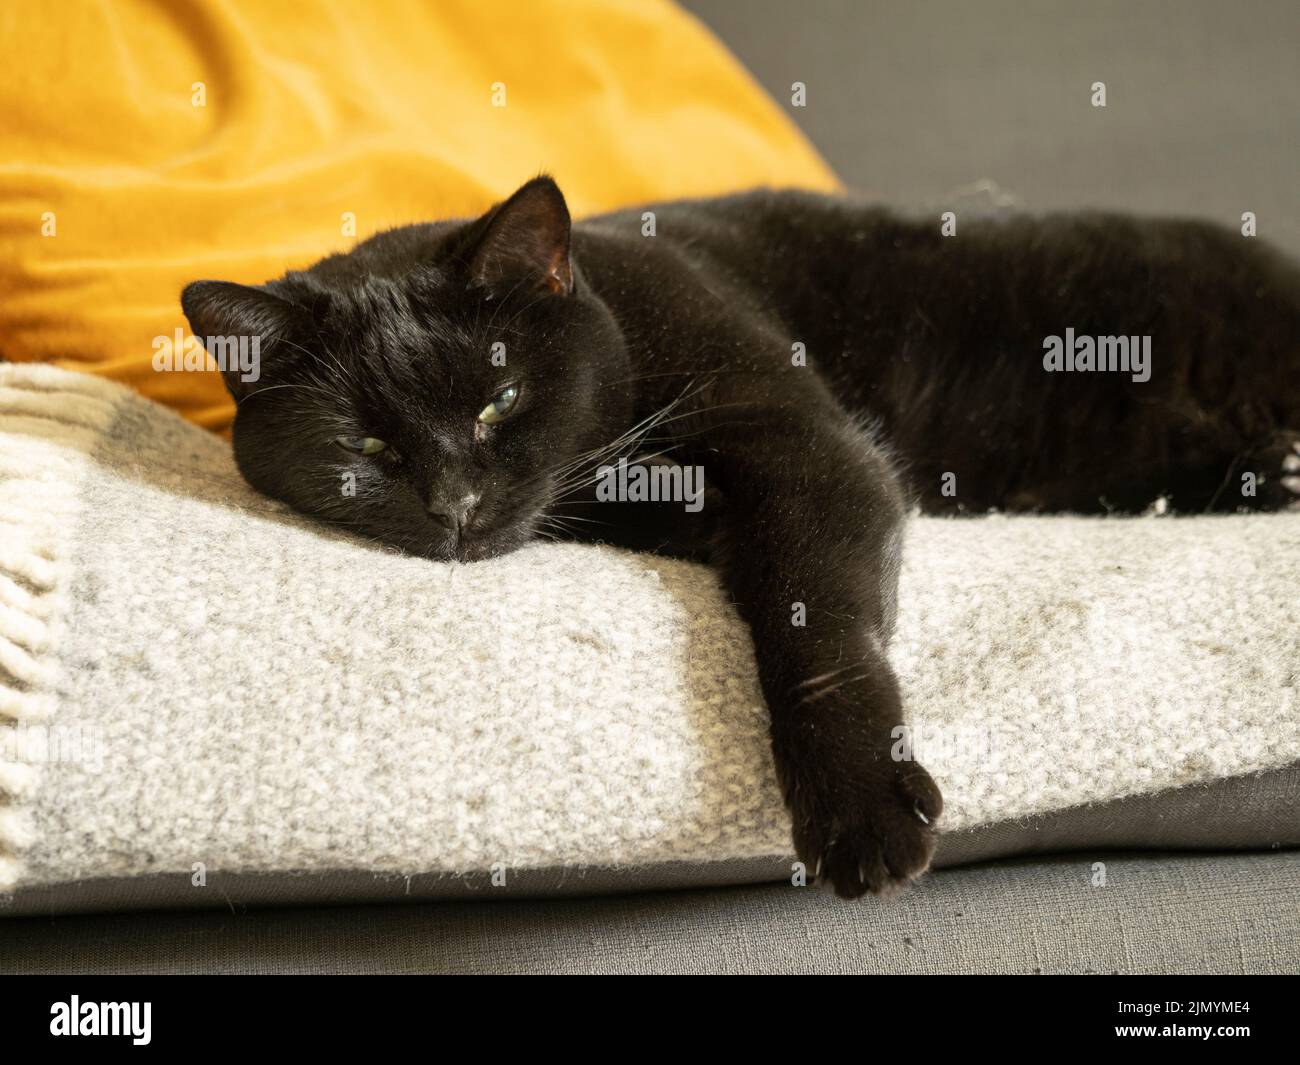 Sleepy black cat laid on a sofa with its paw hanging over the edge. Looking towards the camera. Stock Photo